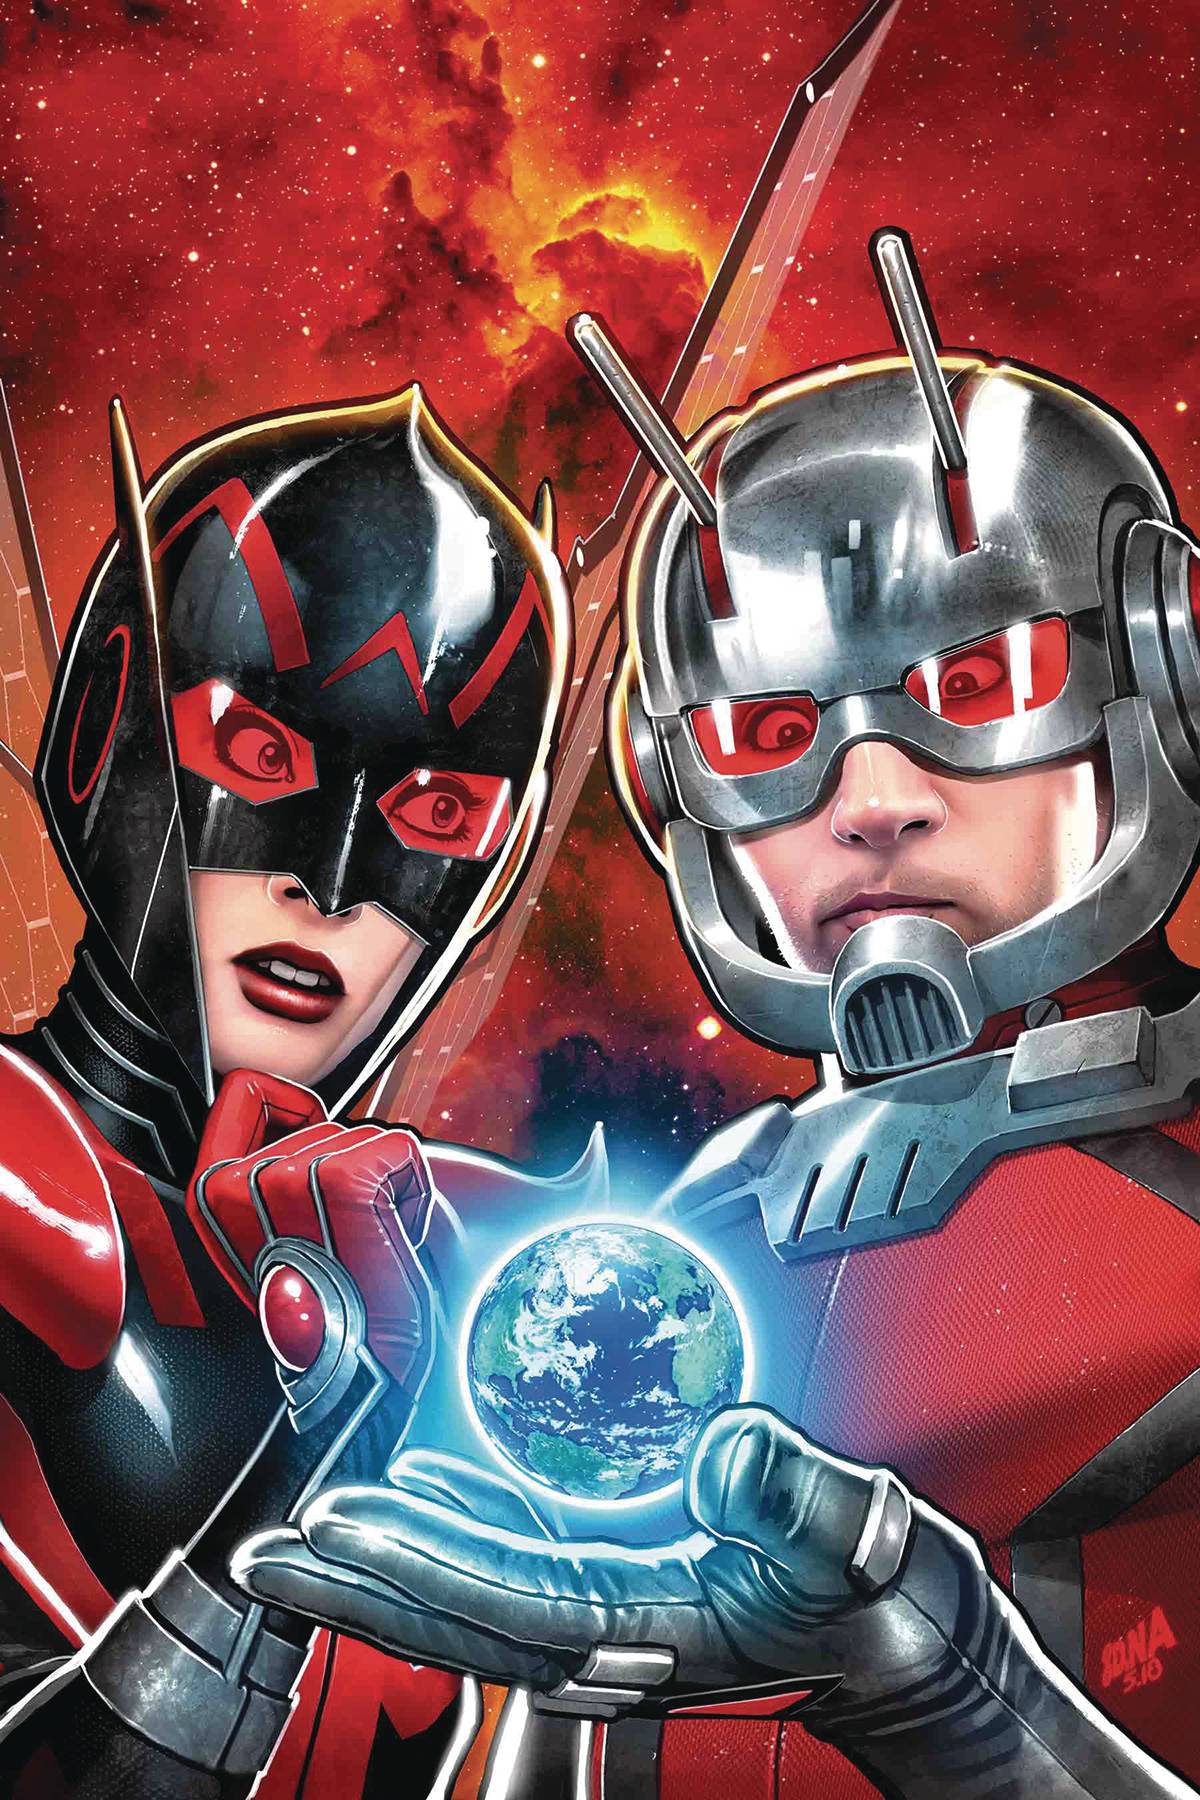 ANT-MAN AND THE WASP #5 (OF 5) FOC 08/13